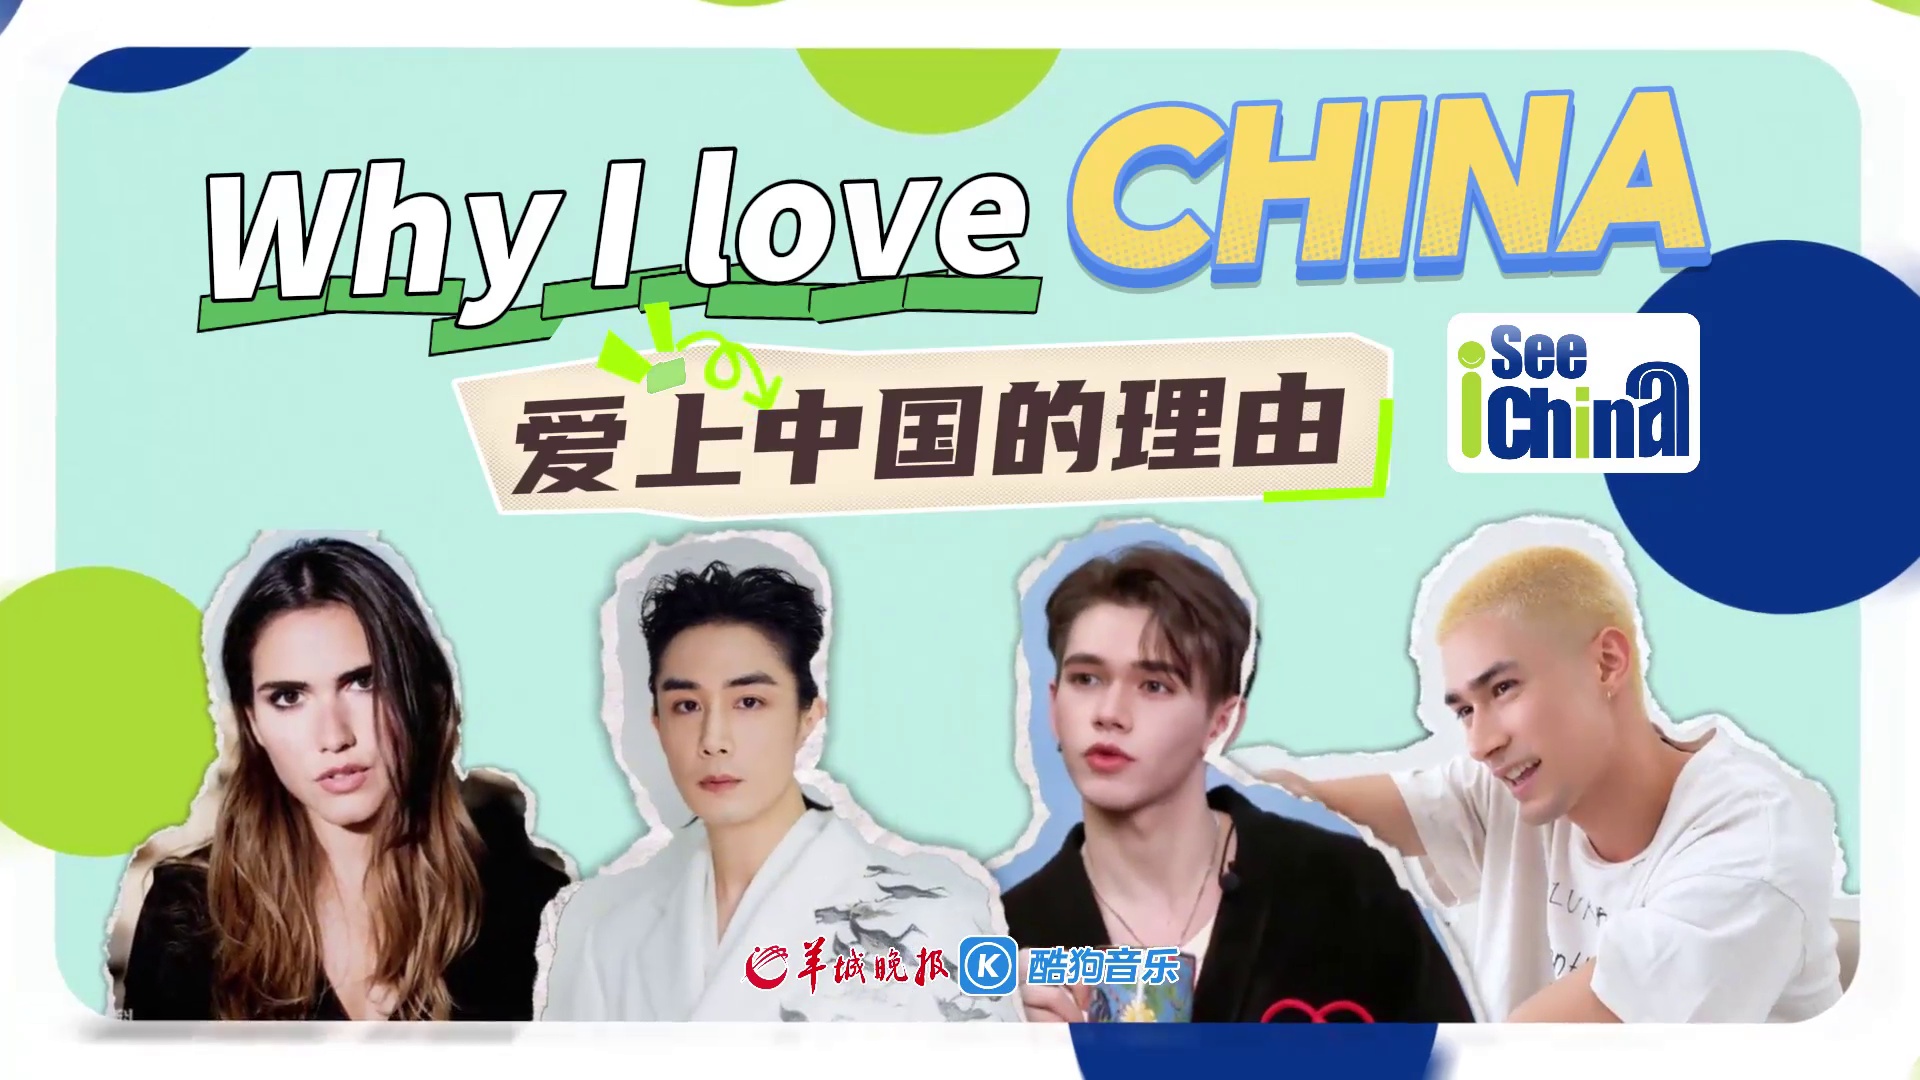 I See China: Hear from foreign 'idols' why they love China